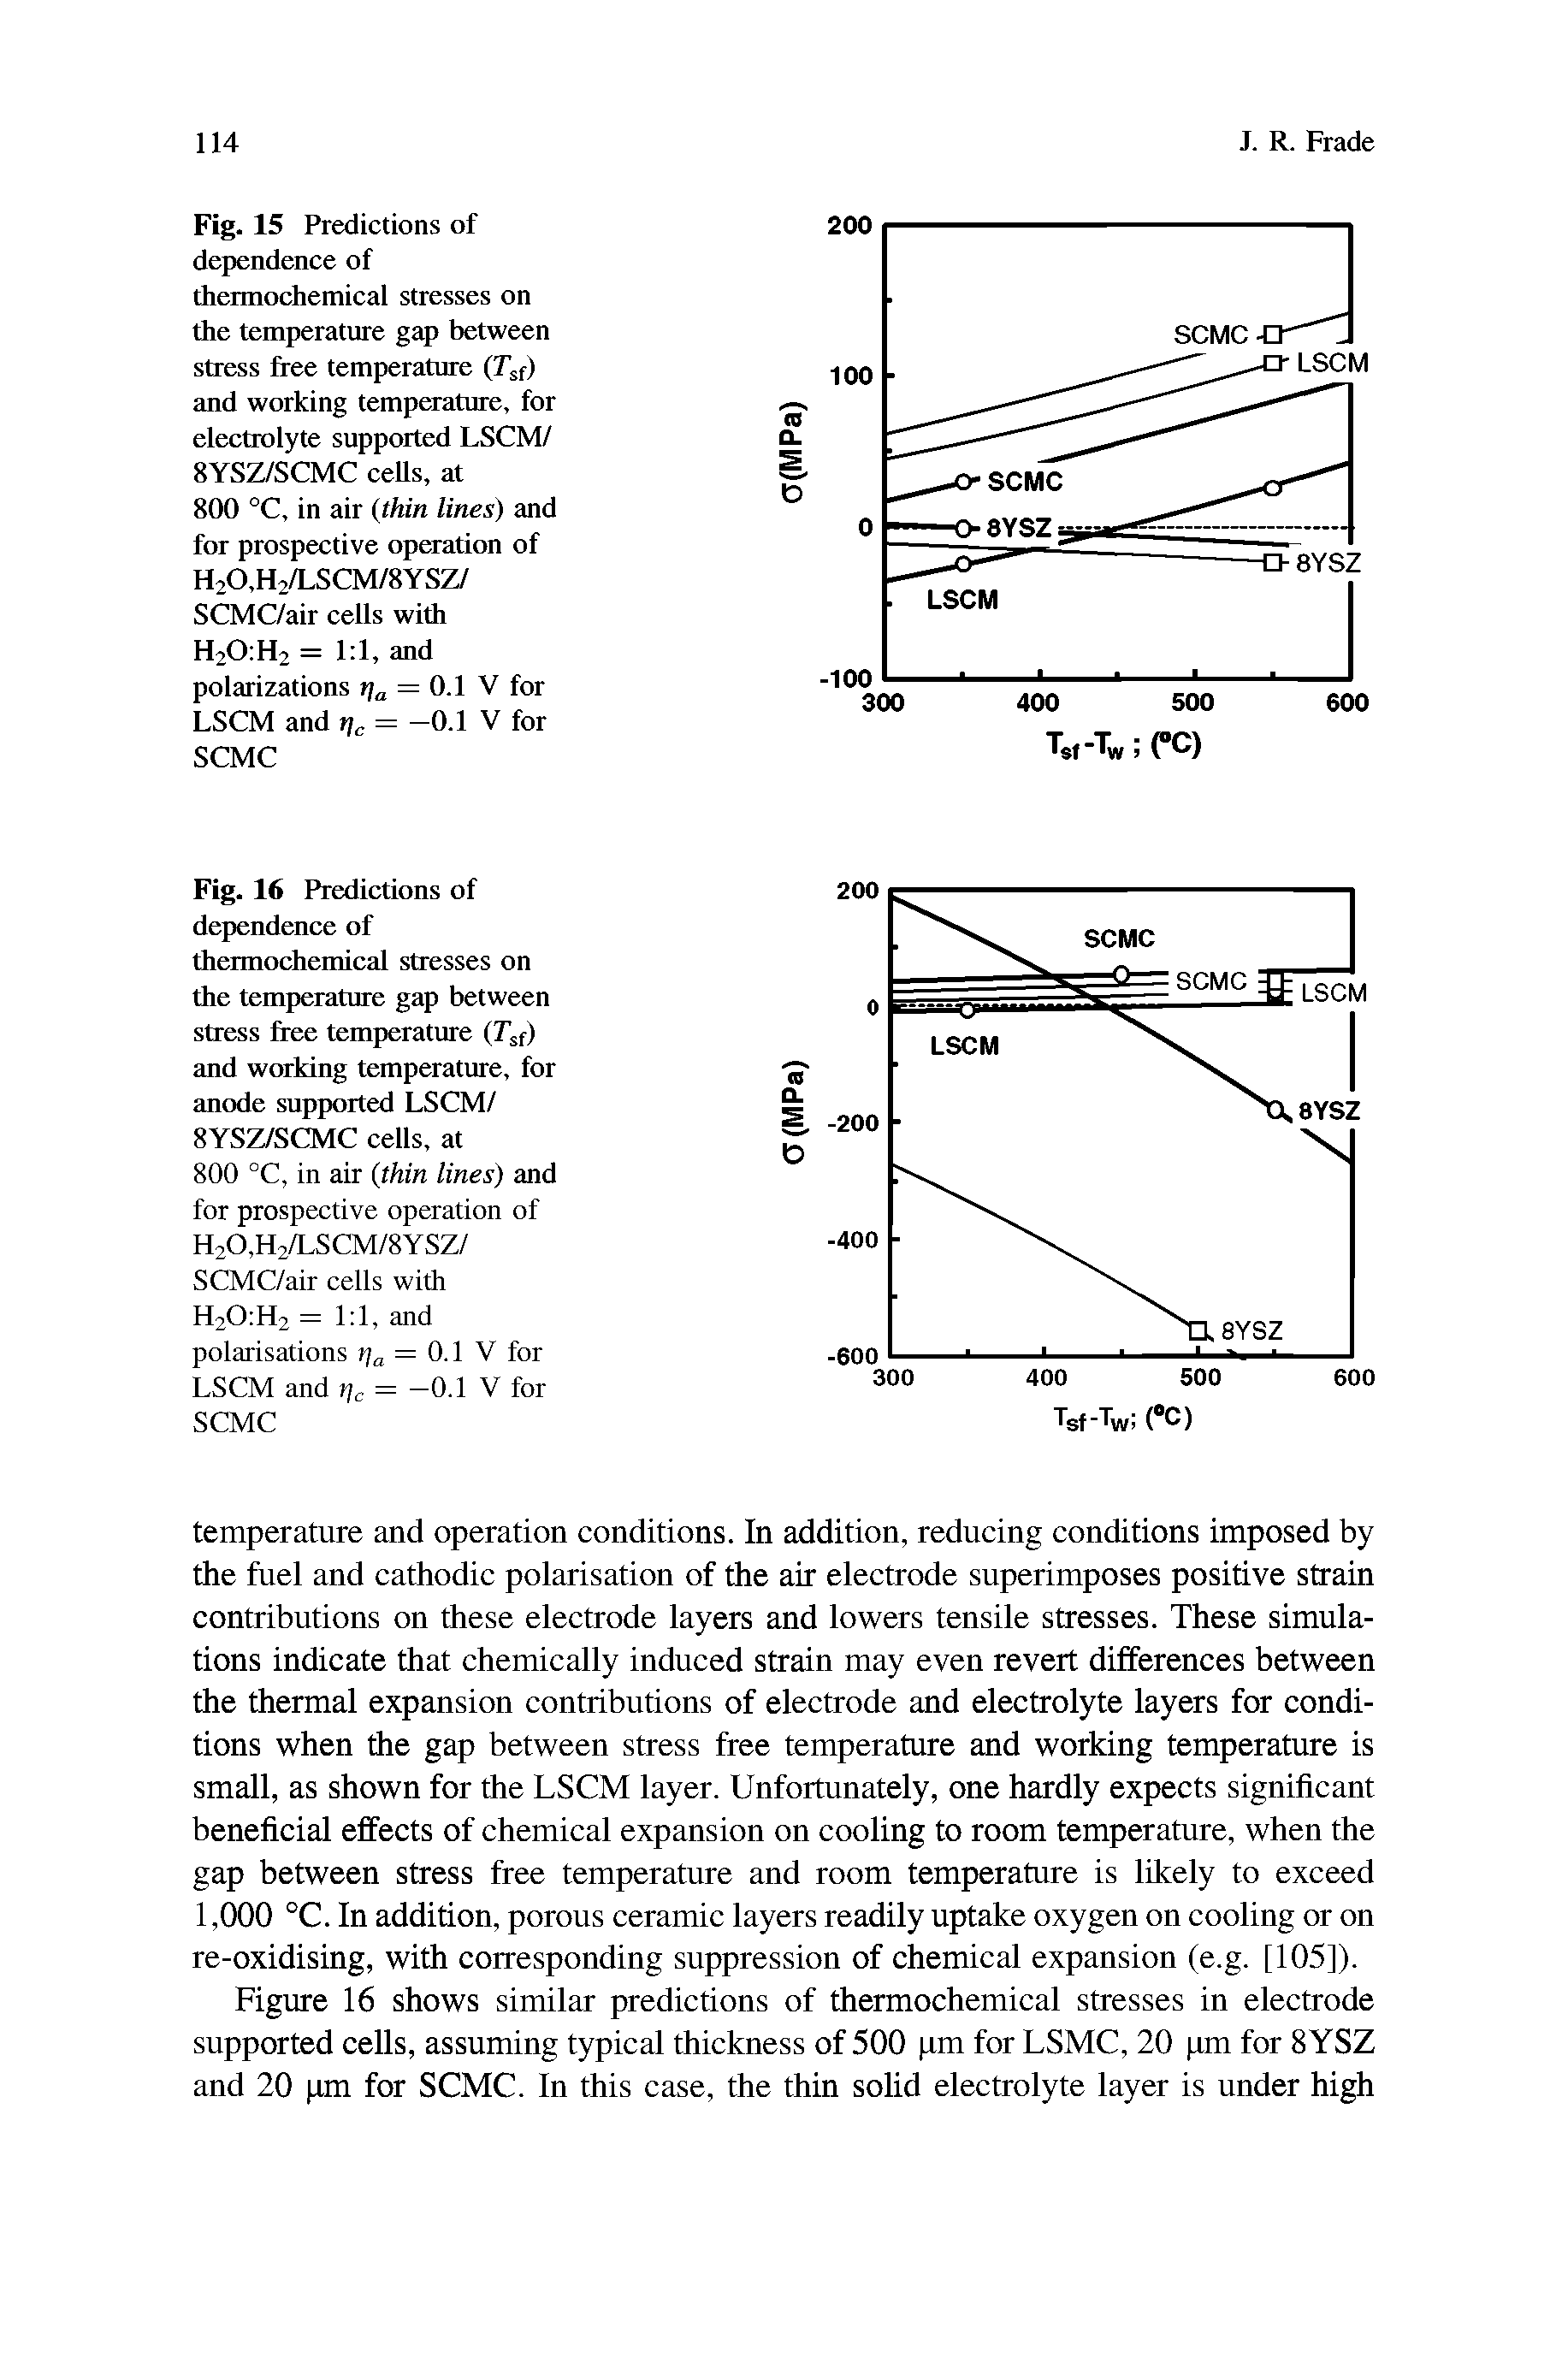 Fig. 16 Predictions of dependence of thermochemical stresses on the temperature gap between stress free temperature (T f) and working temperature, for anode supported LSCM/ 8YSZ/SCMC cells, at 800 °C, in air (thin lines) and for prospective operation of H20,H2/LSCM/8YSZ/ SCMC/air cells with H20 H2 = 1 1, and polarisations = 0.1 V for LSCM and ij, = -0.1 V for SCMC...